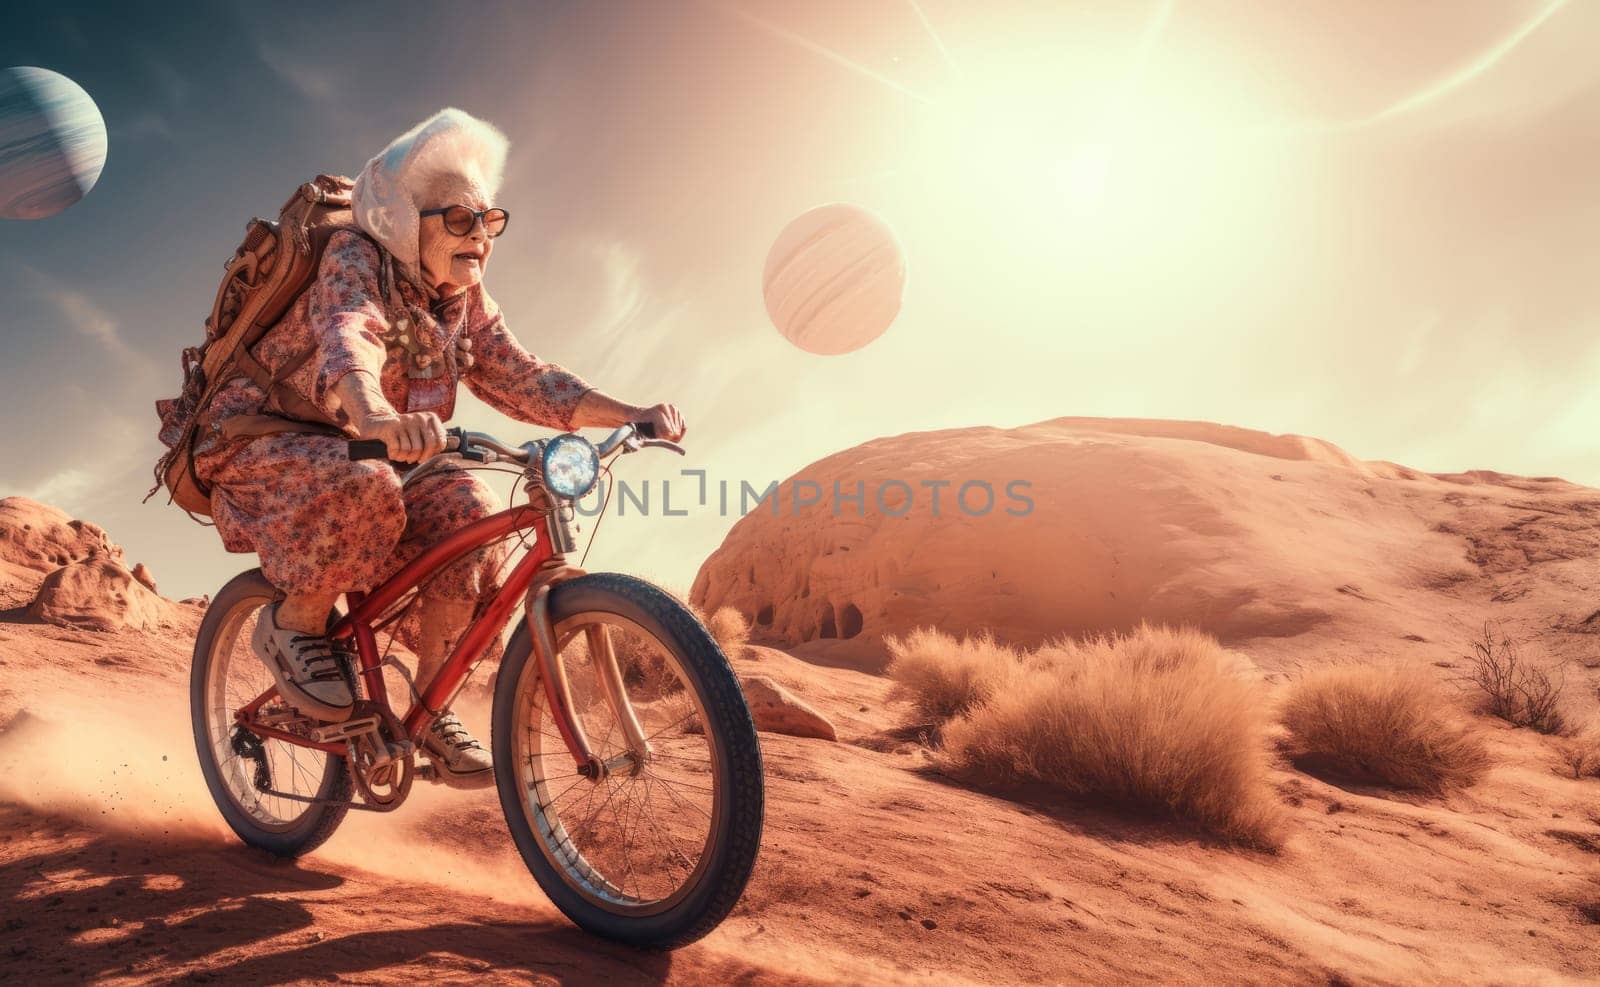 A futuristic depiction shows an elderly woman cycling across the surface of the moon, blending imagination, exploration, and the concept of space-age transportation.Generated image by dotshock